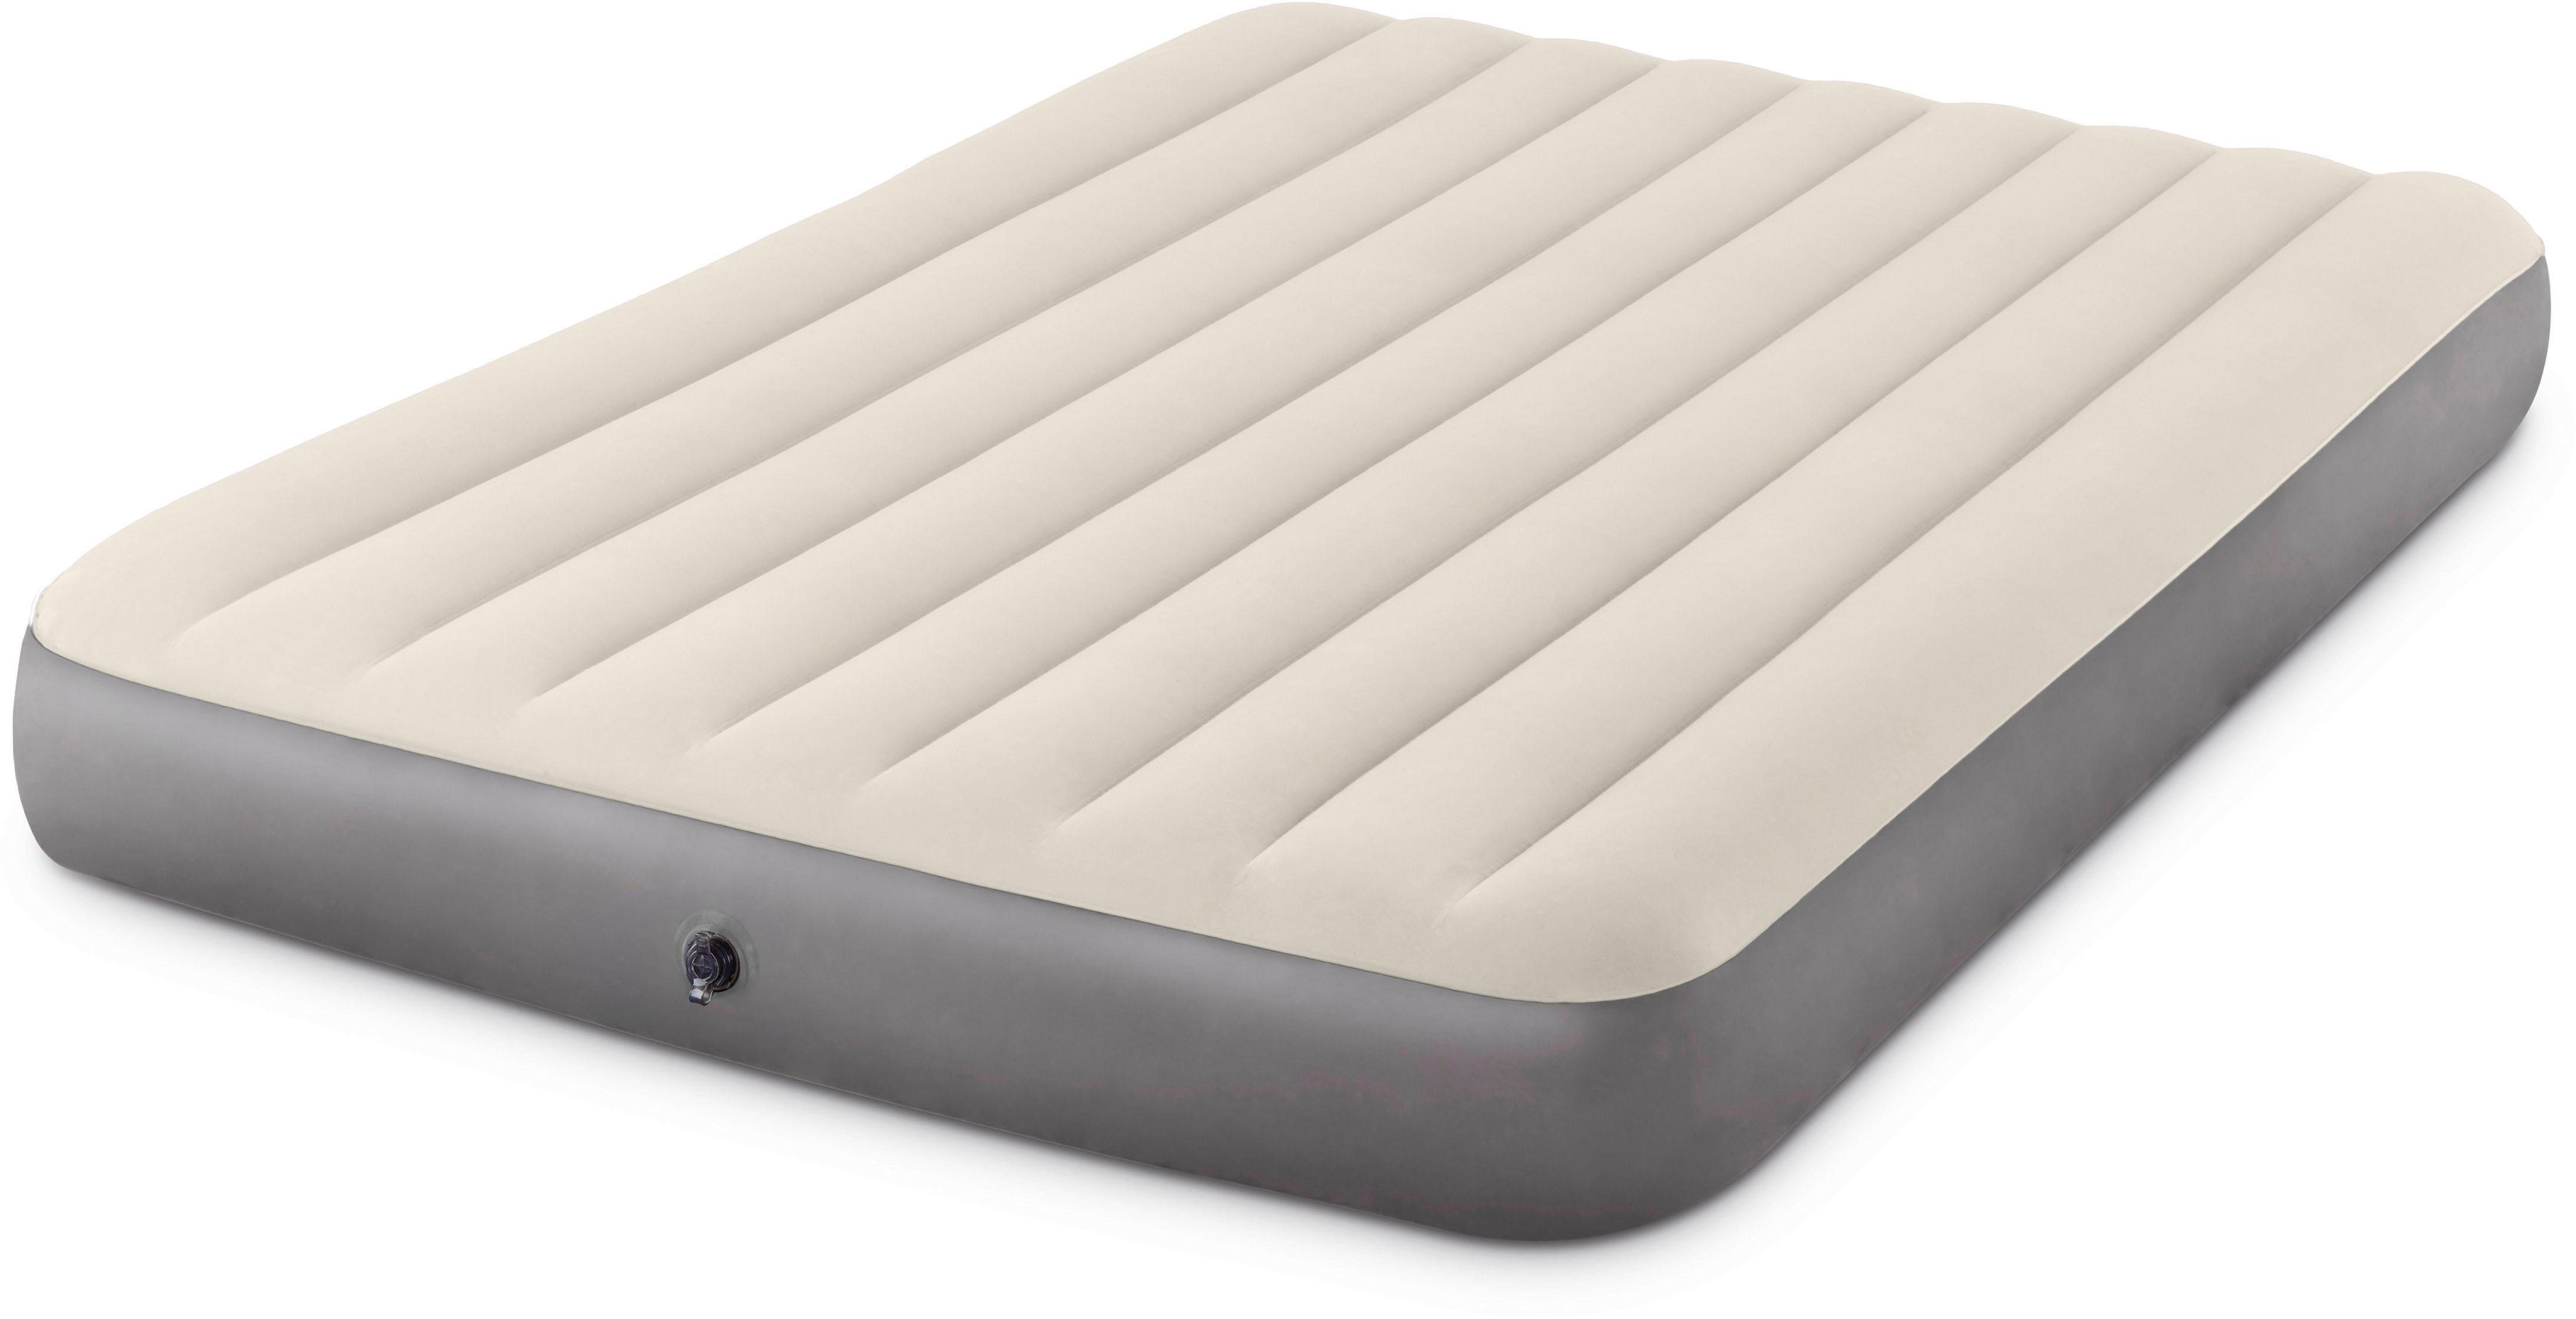 intex luchtbed deluxe single high airbed grijs